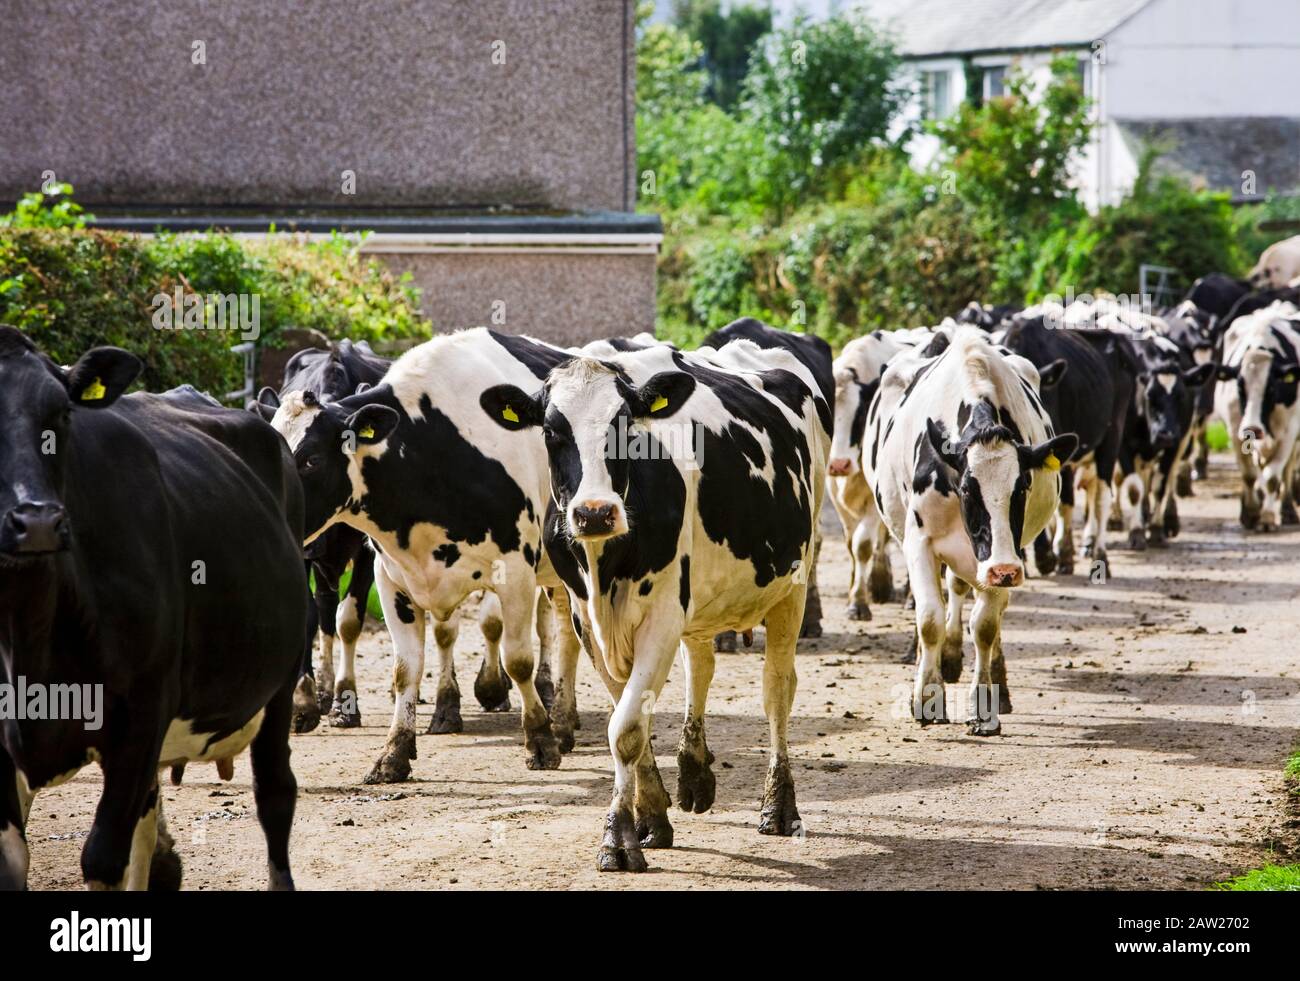 Herd of dairy cows walking down a rural lane towards a farm, England, UK Stock Photo